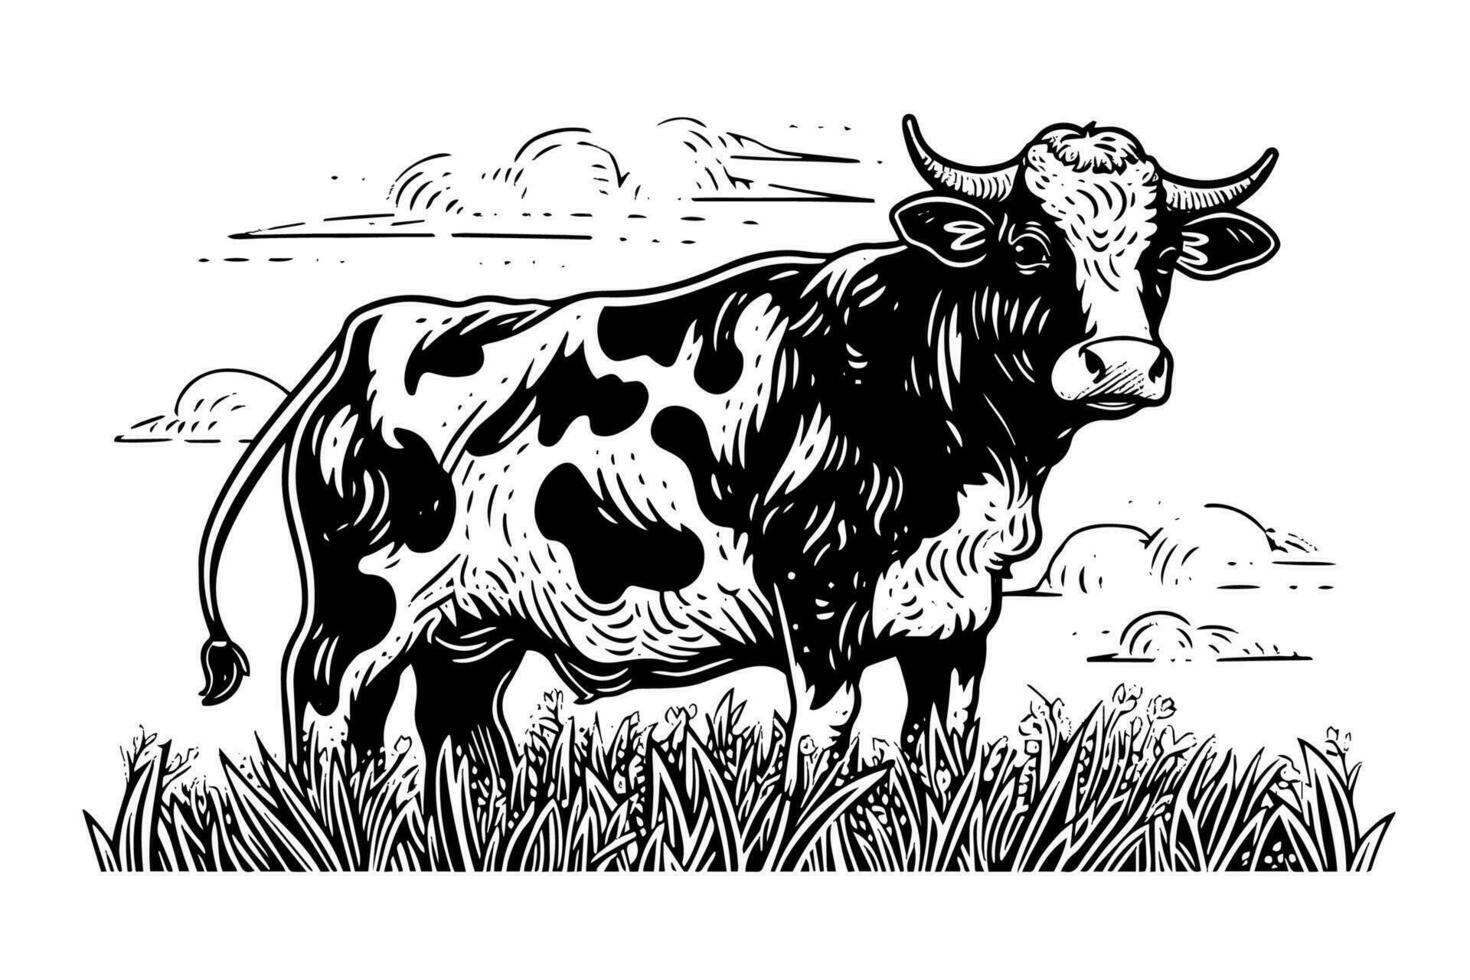 Cow grazes in the field. Vector hand drawn engraving style illustration.